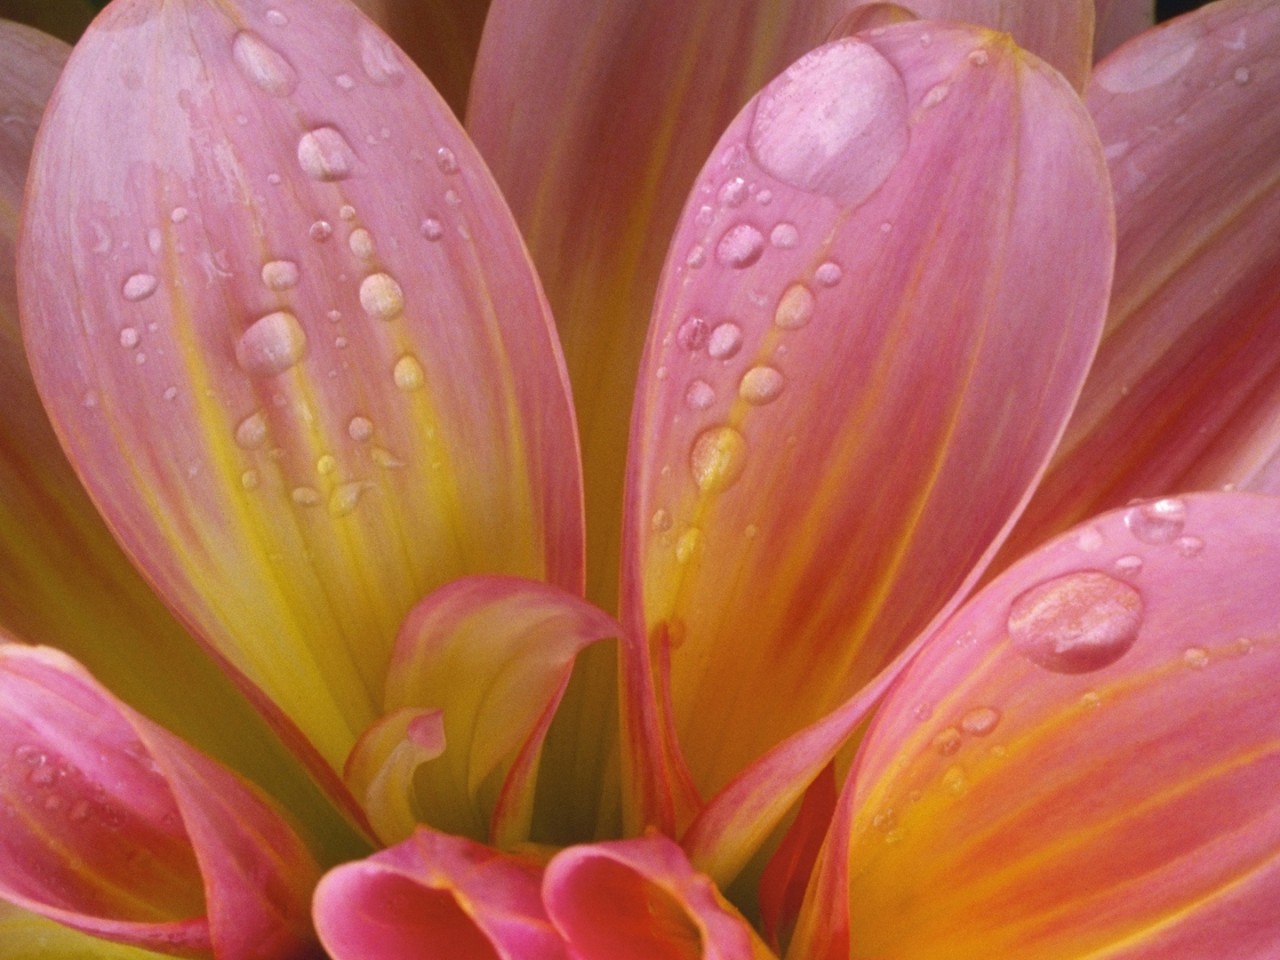 Flowers With Drops Of Water 4k Wallpaper Download For Desktop Mobile Phones  And Laptops 3840x2400 : Wallpapers13.com